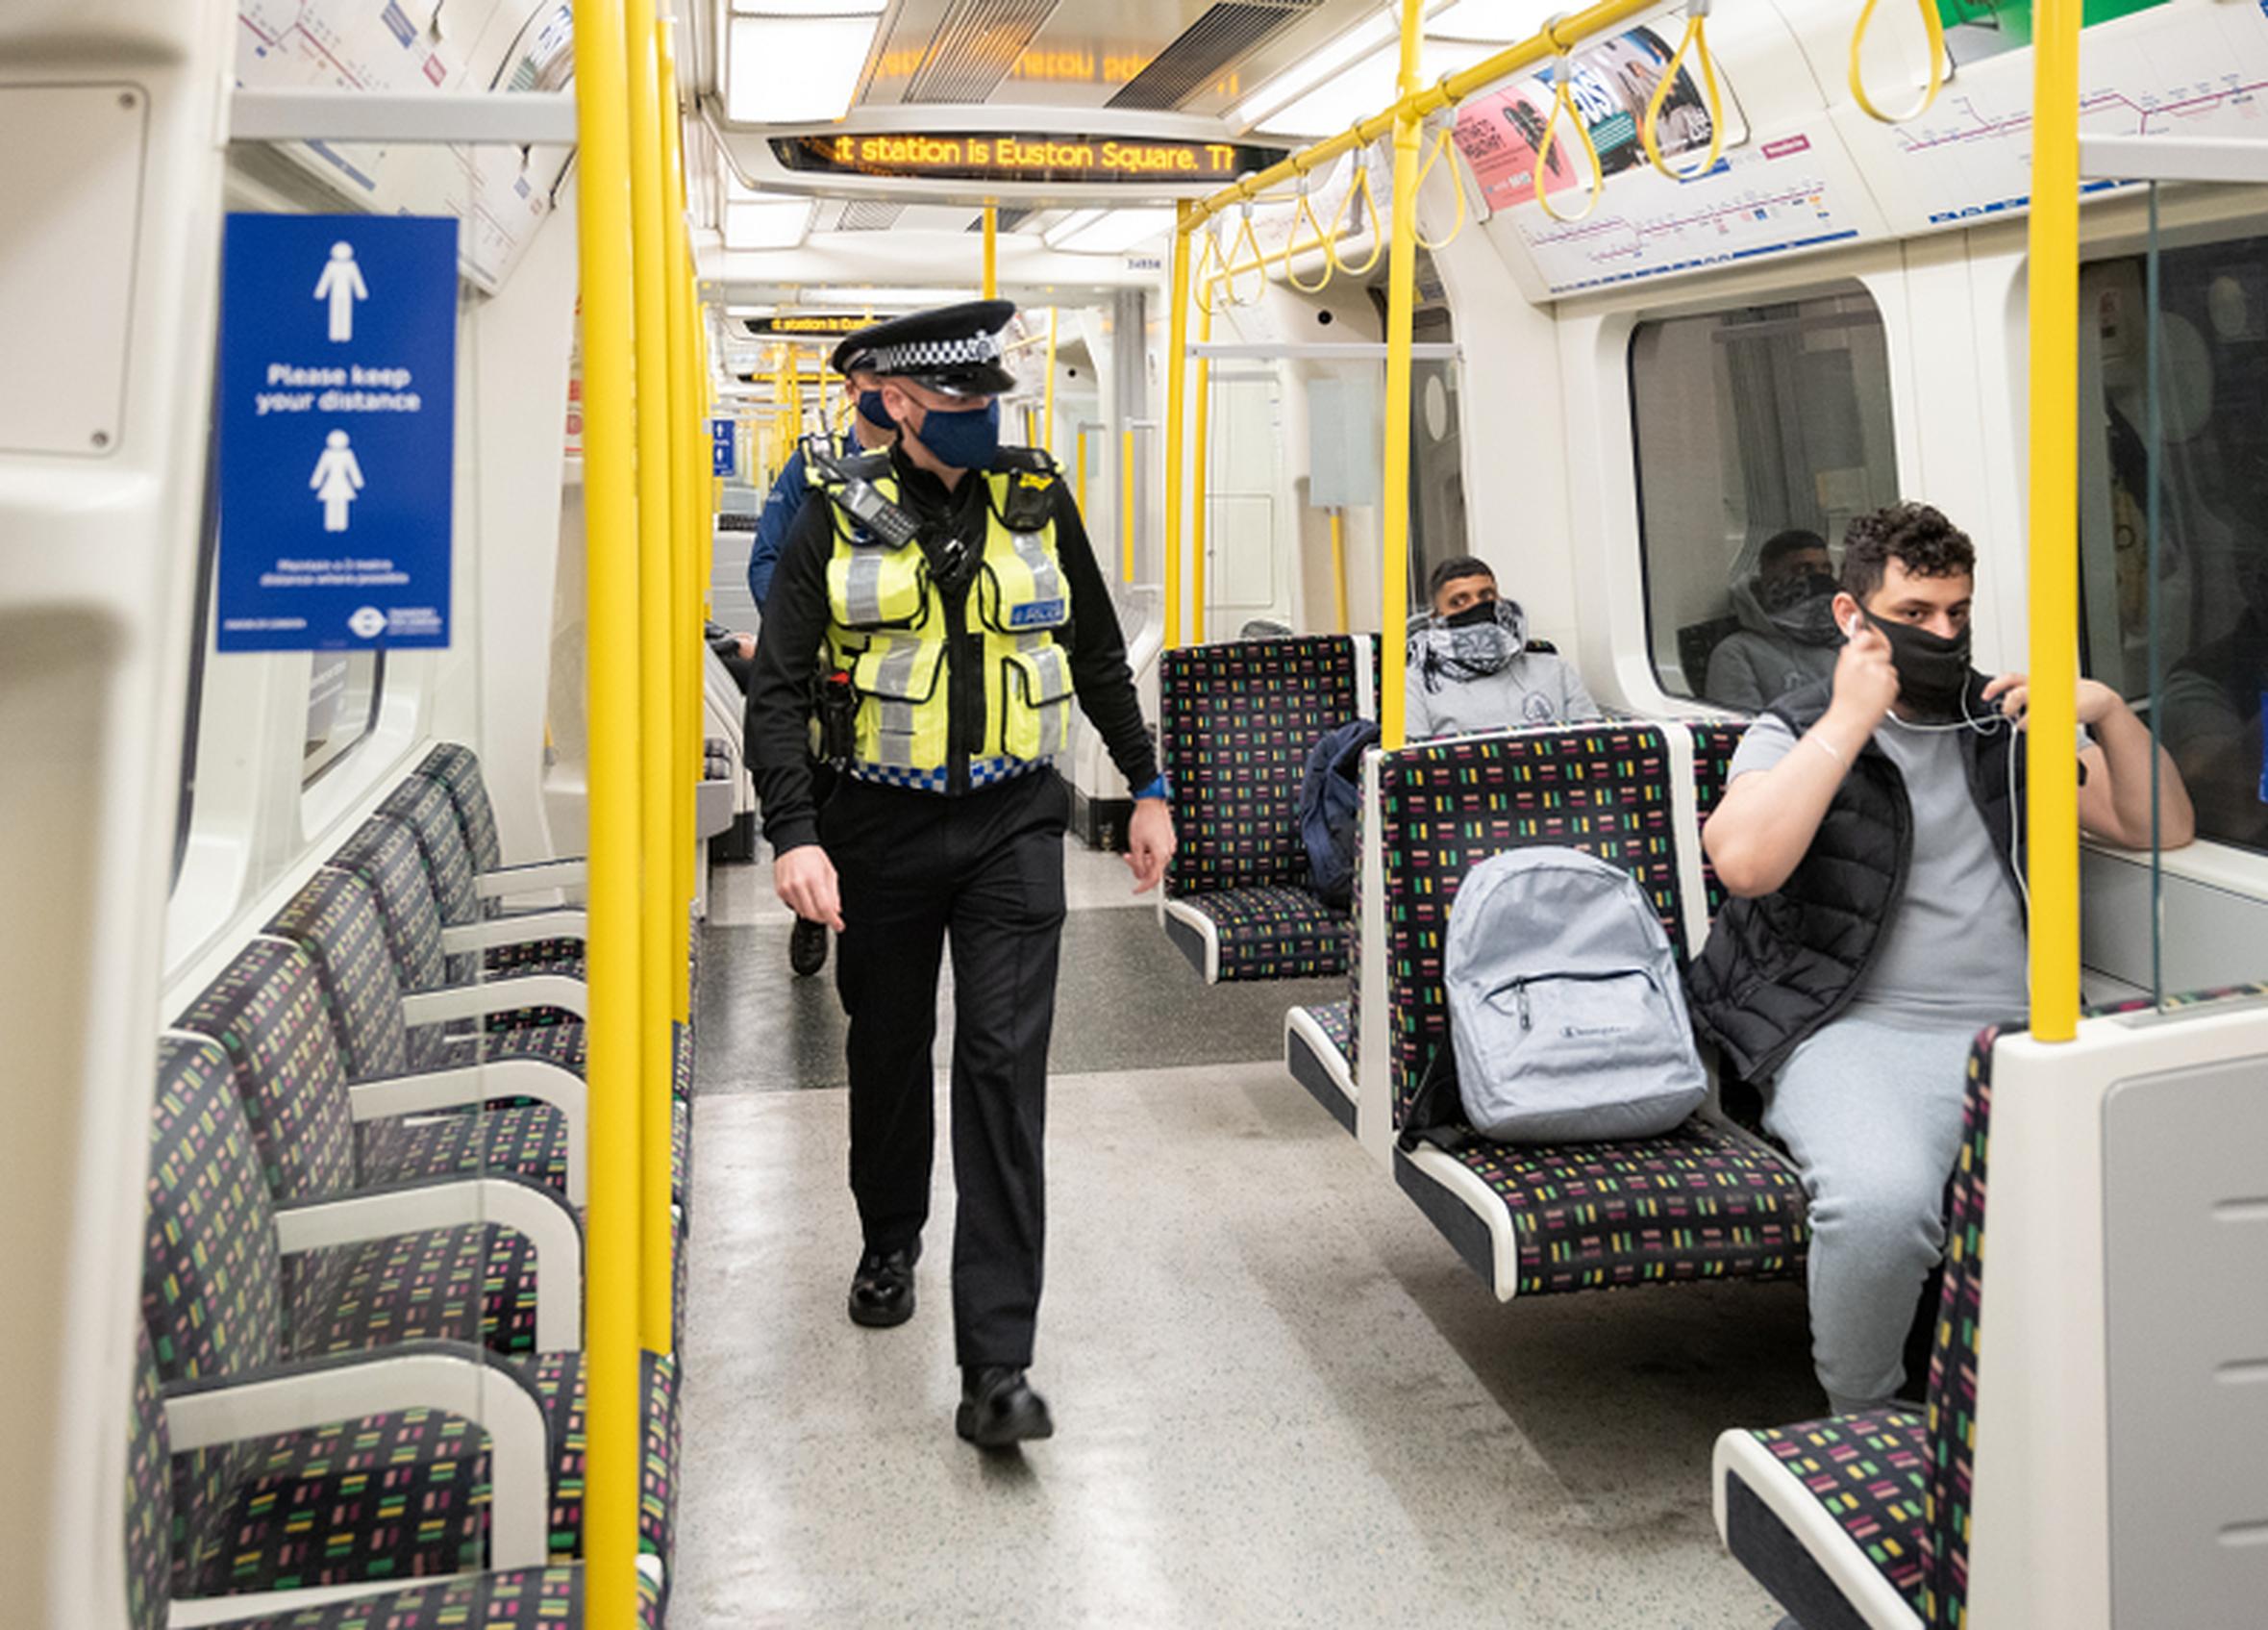 TfL and BTP officers patrolling the Tube network